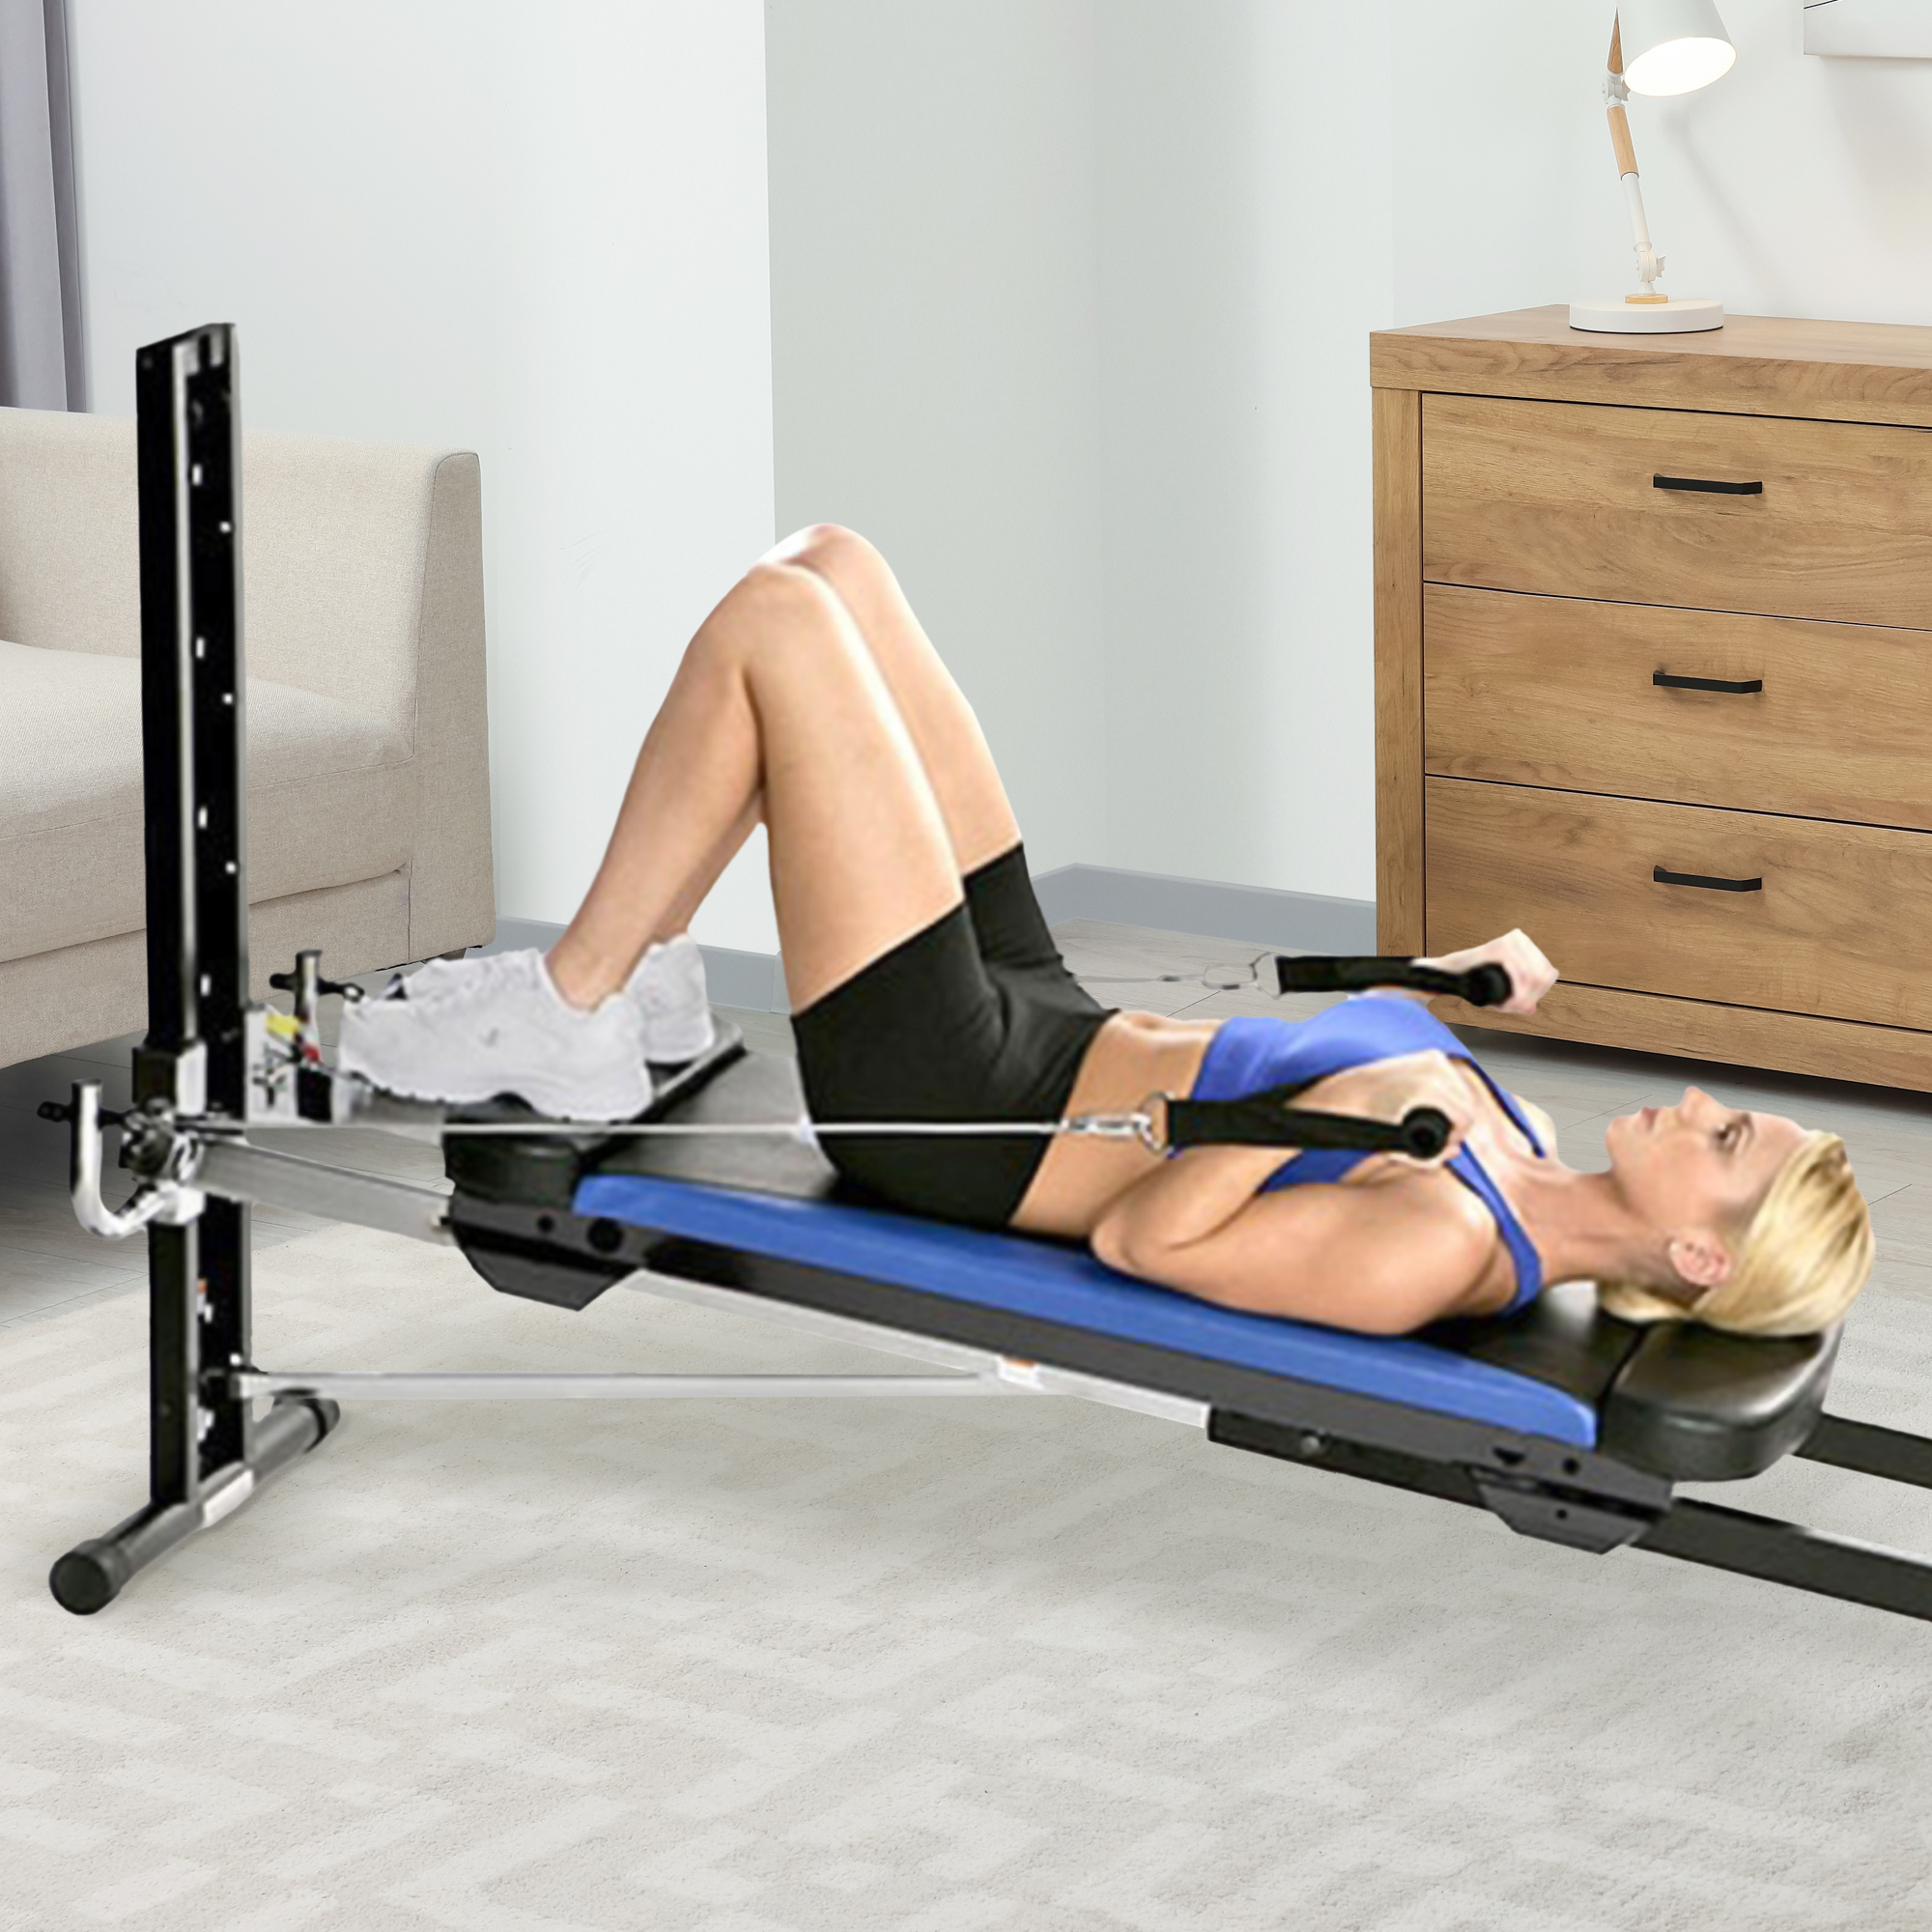 Total Gym XLS Men/Women Universal Fold Home Gym Workout Machine Plus Accessories - image 4 of 11